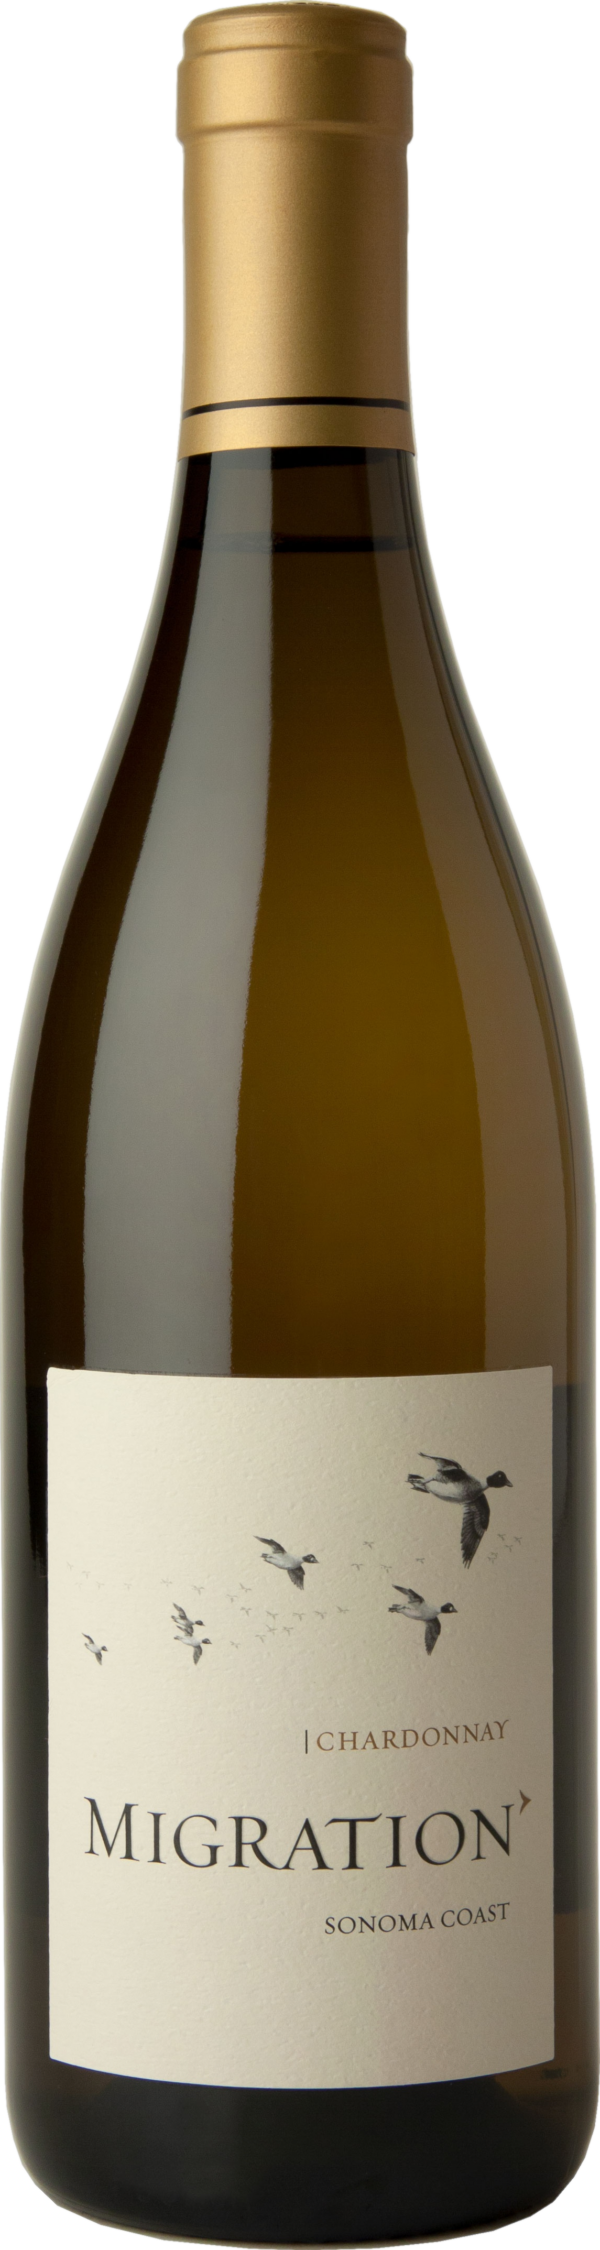 Product image of Duckhorn Migration Sonoma Coast Chardonnay 2020 from 8wines